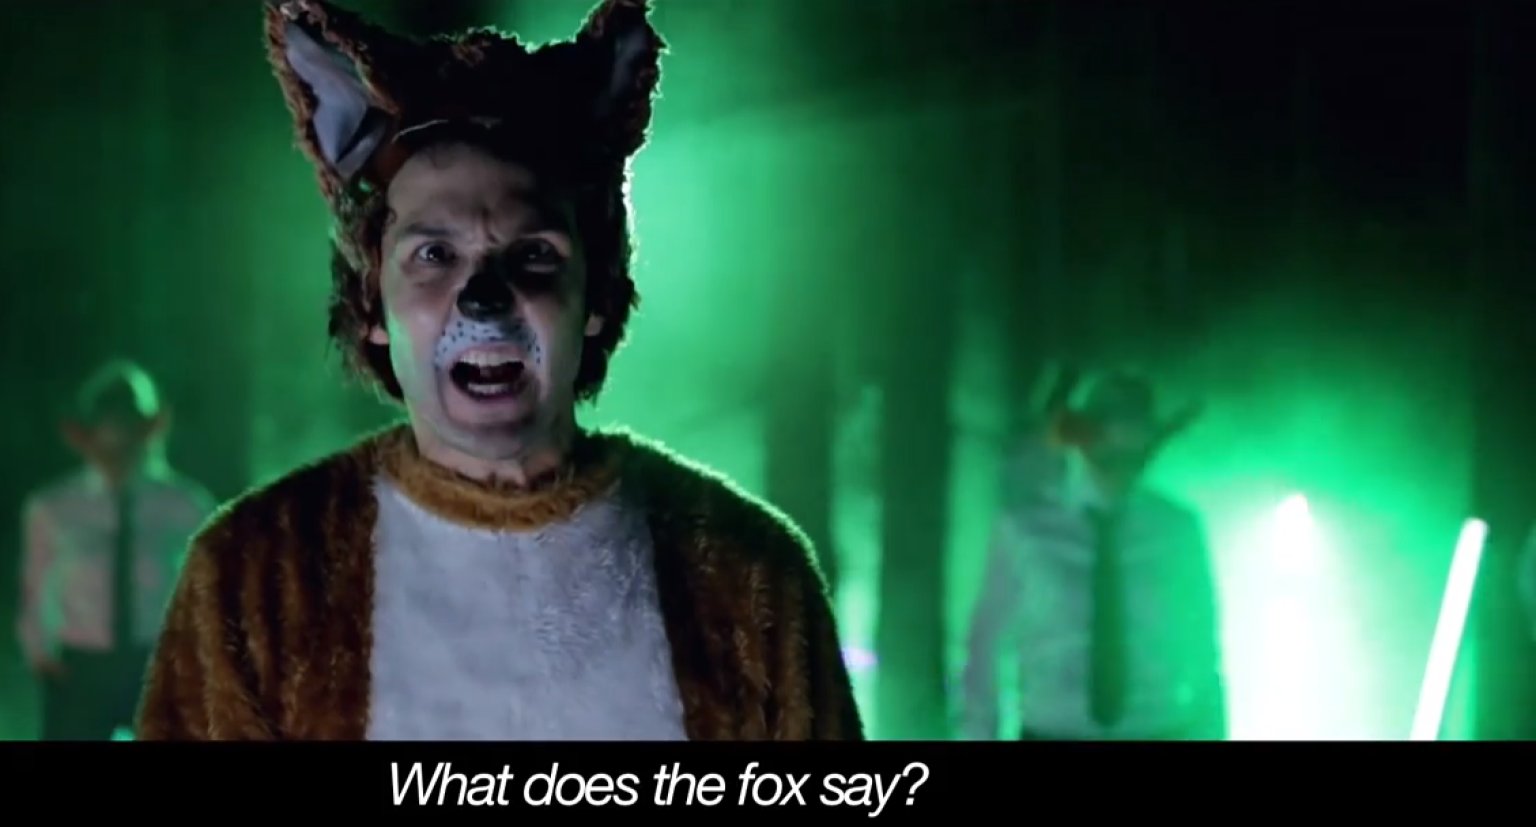 Ylvis - What does the fox say?